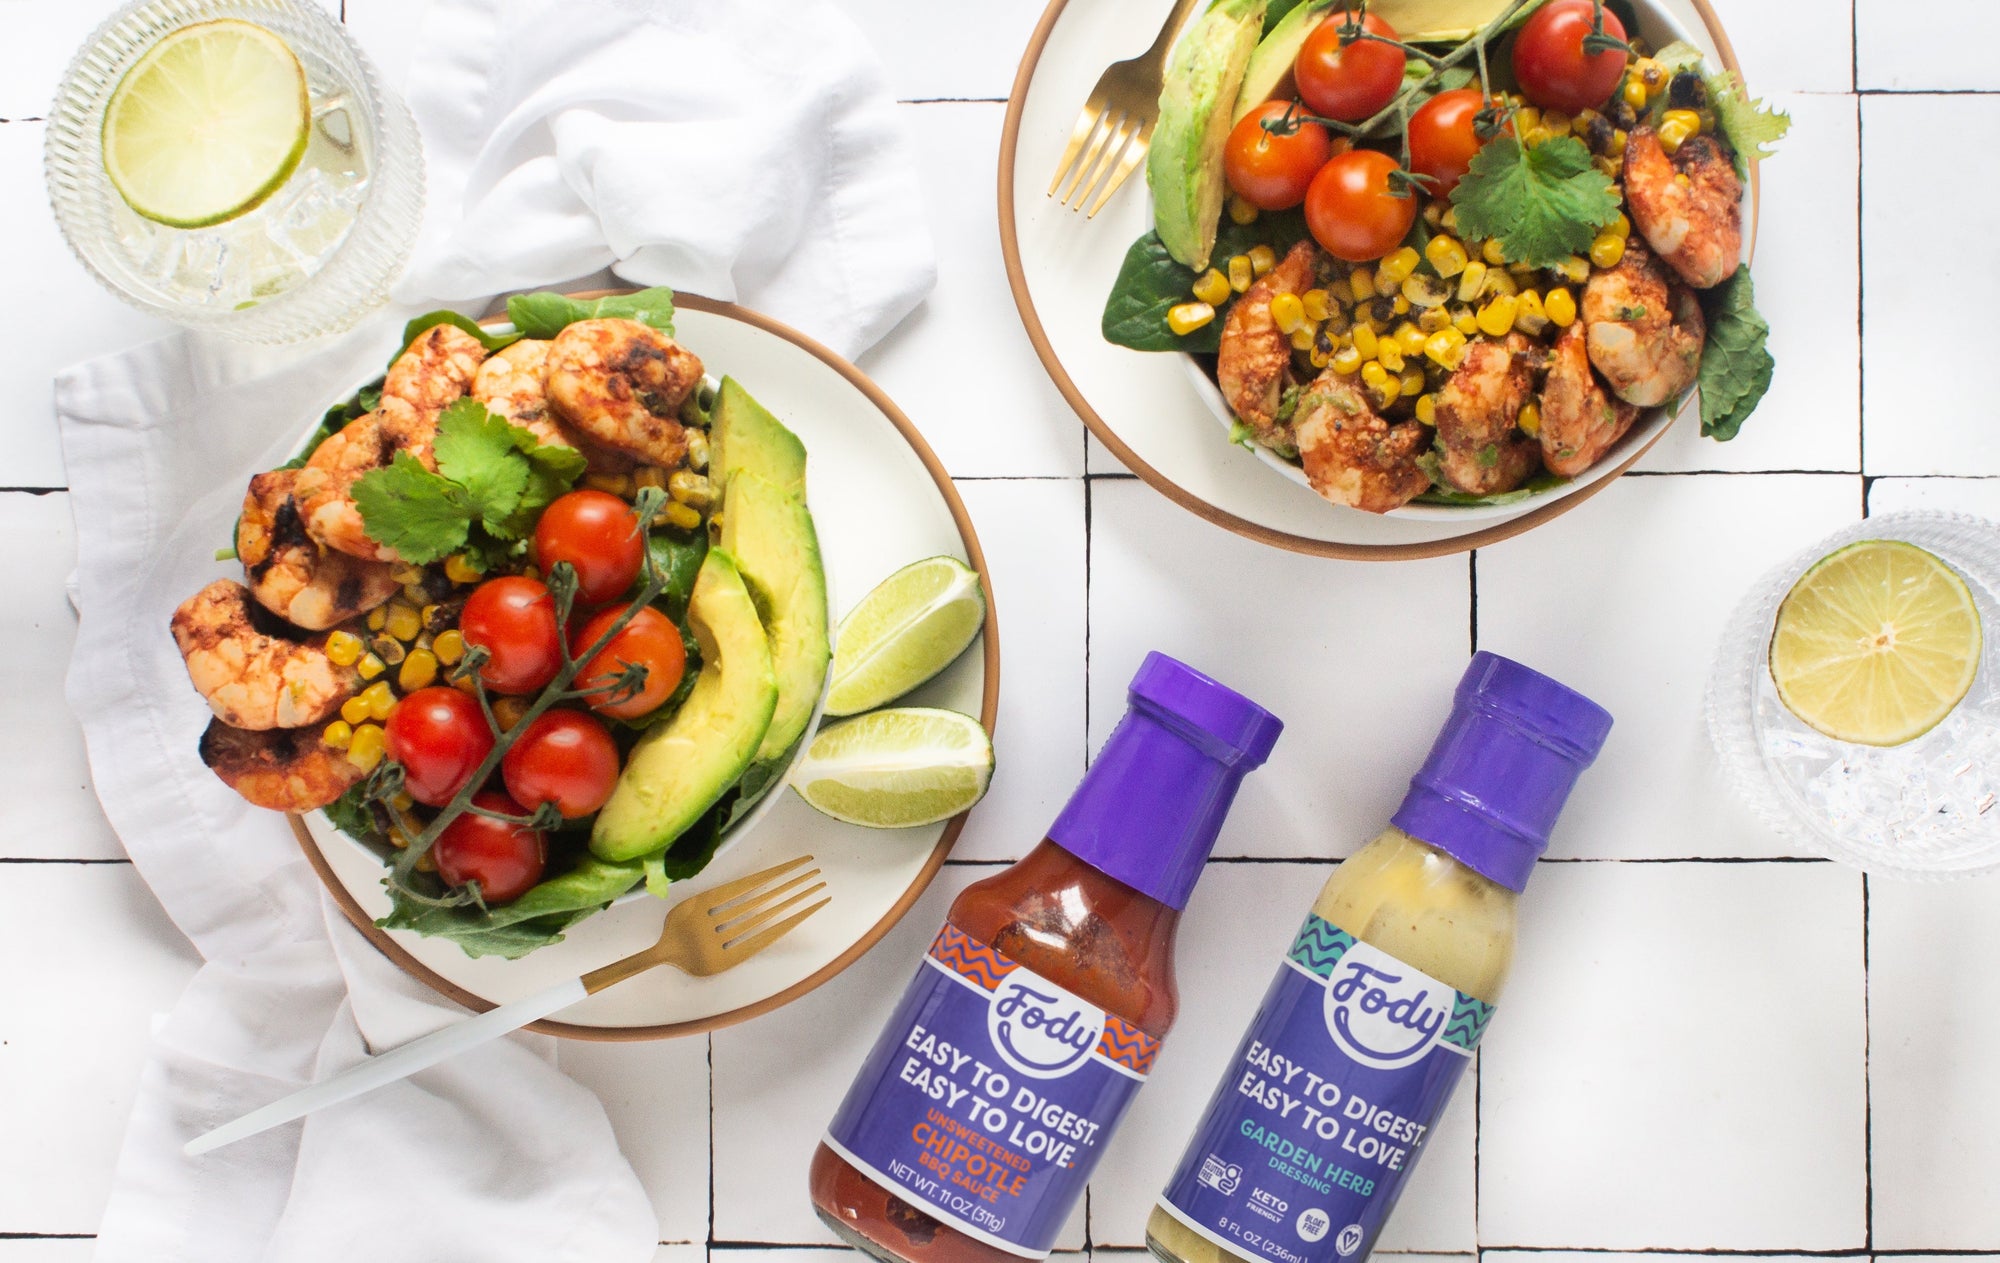 Fody's Chipotle Shrimp Salad with Garden Herb Dressing and a bottle of chipotle bbq sauce